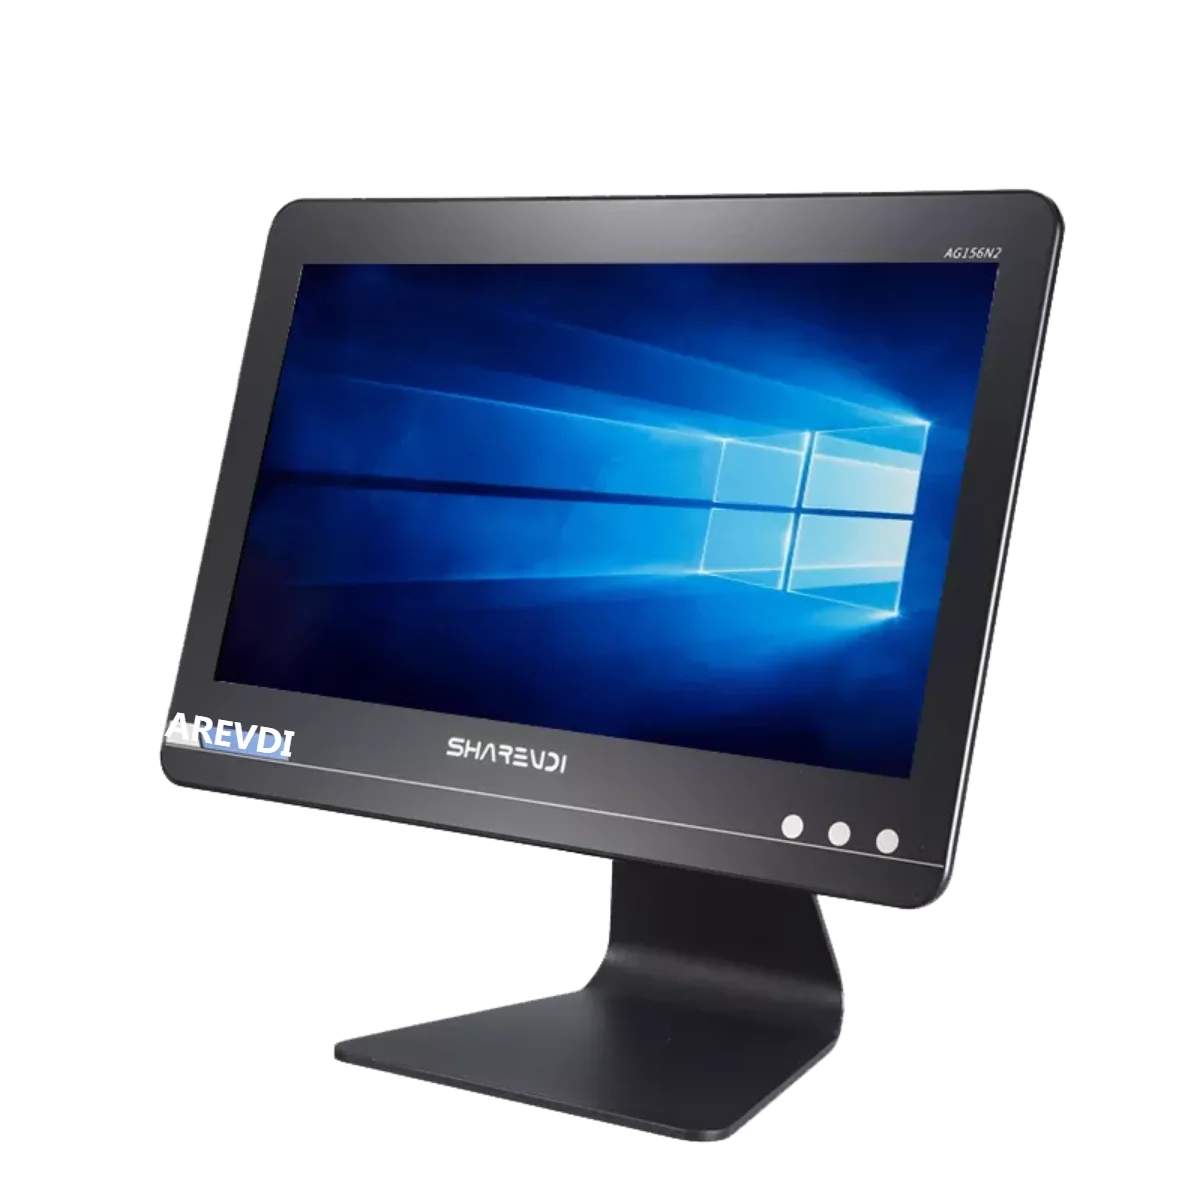 15 17 inch i3 i5 wireless RS232 touch screen All in one industrial pc